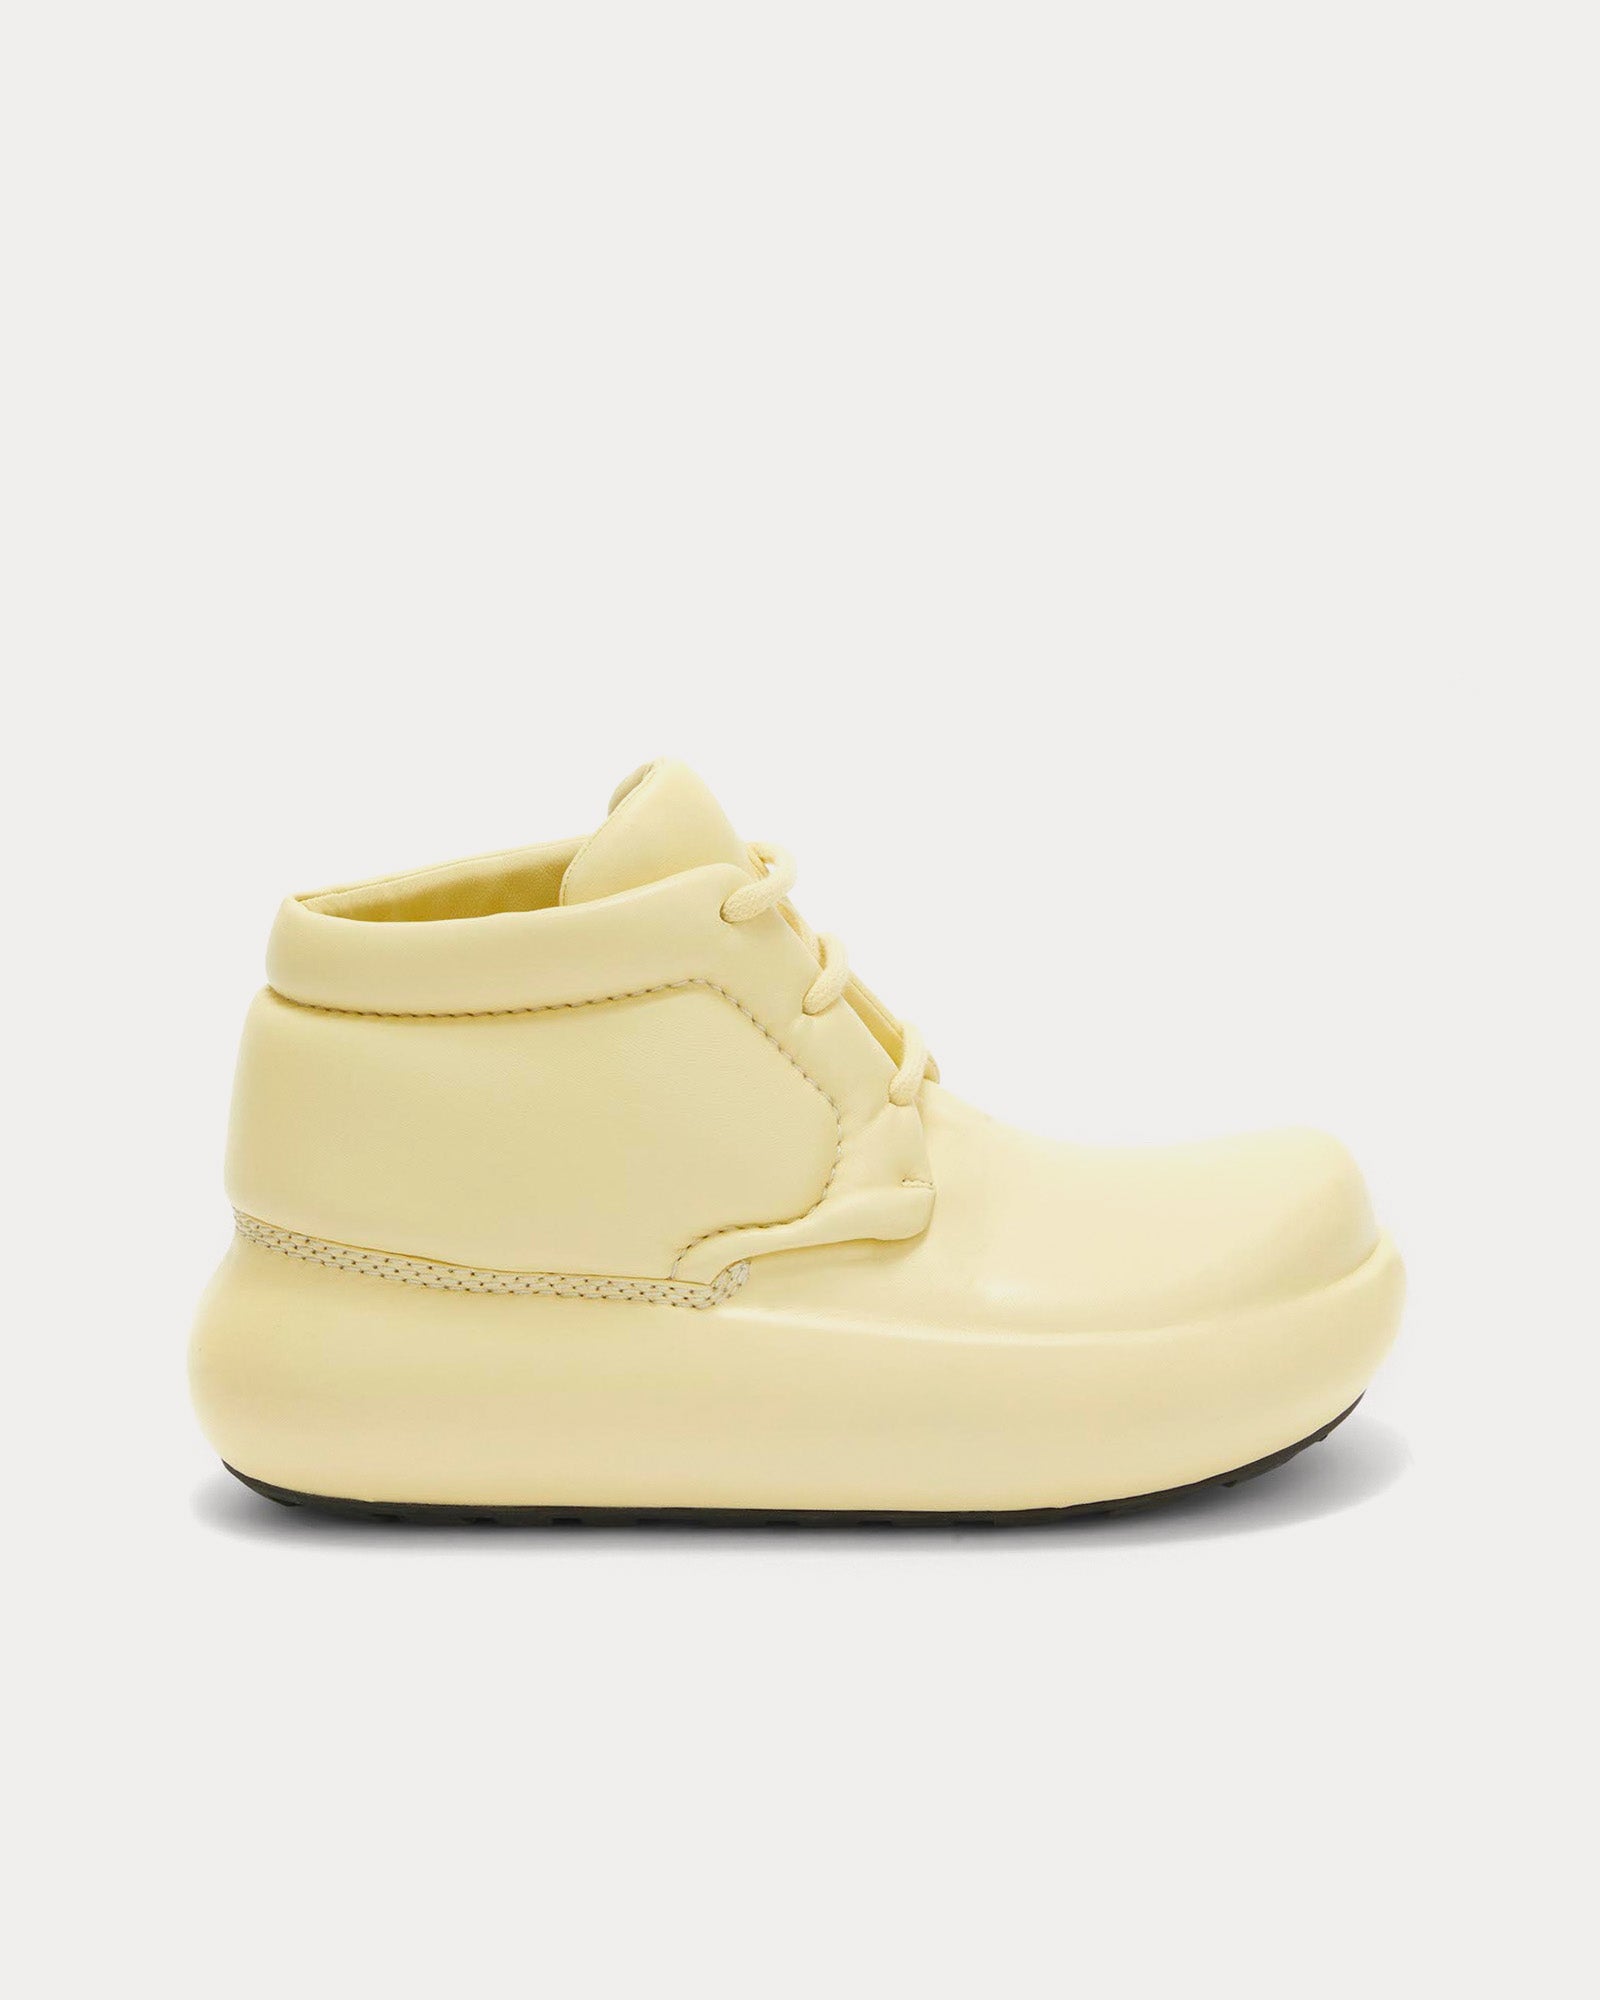 Jil Sander - Padded Lace-Up Leather Black Yellow High Top Sneakers